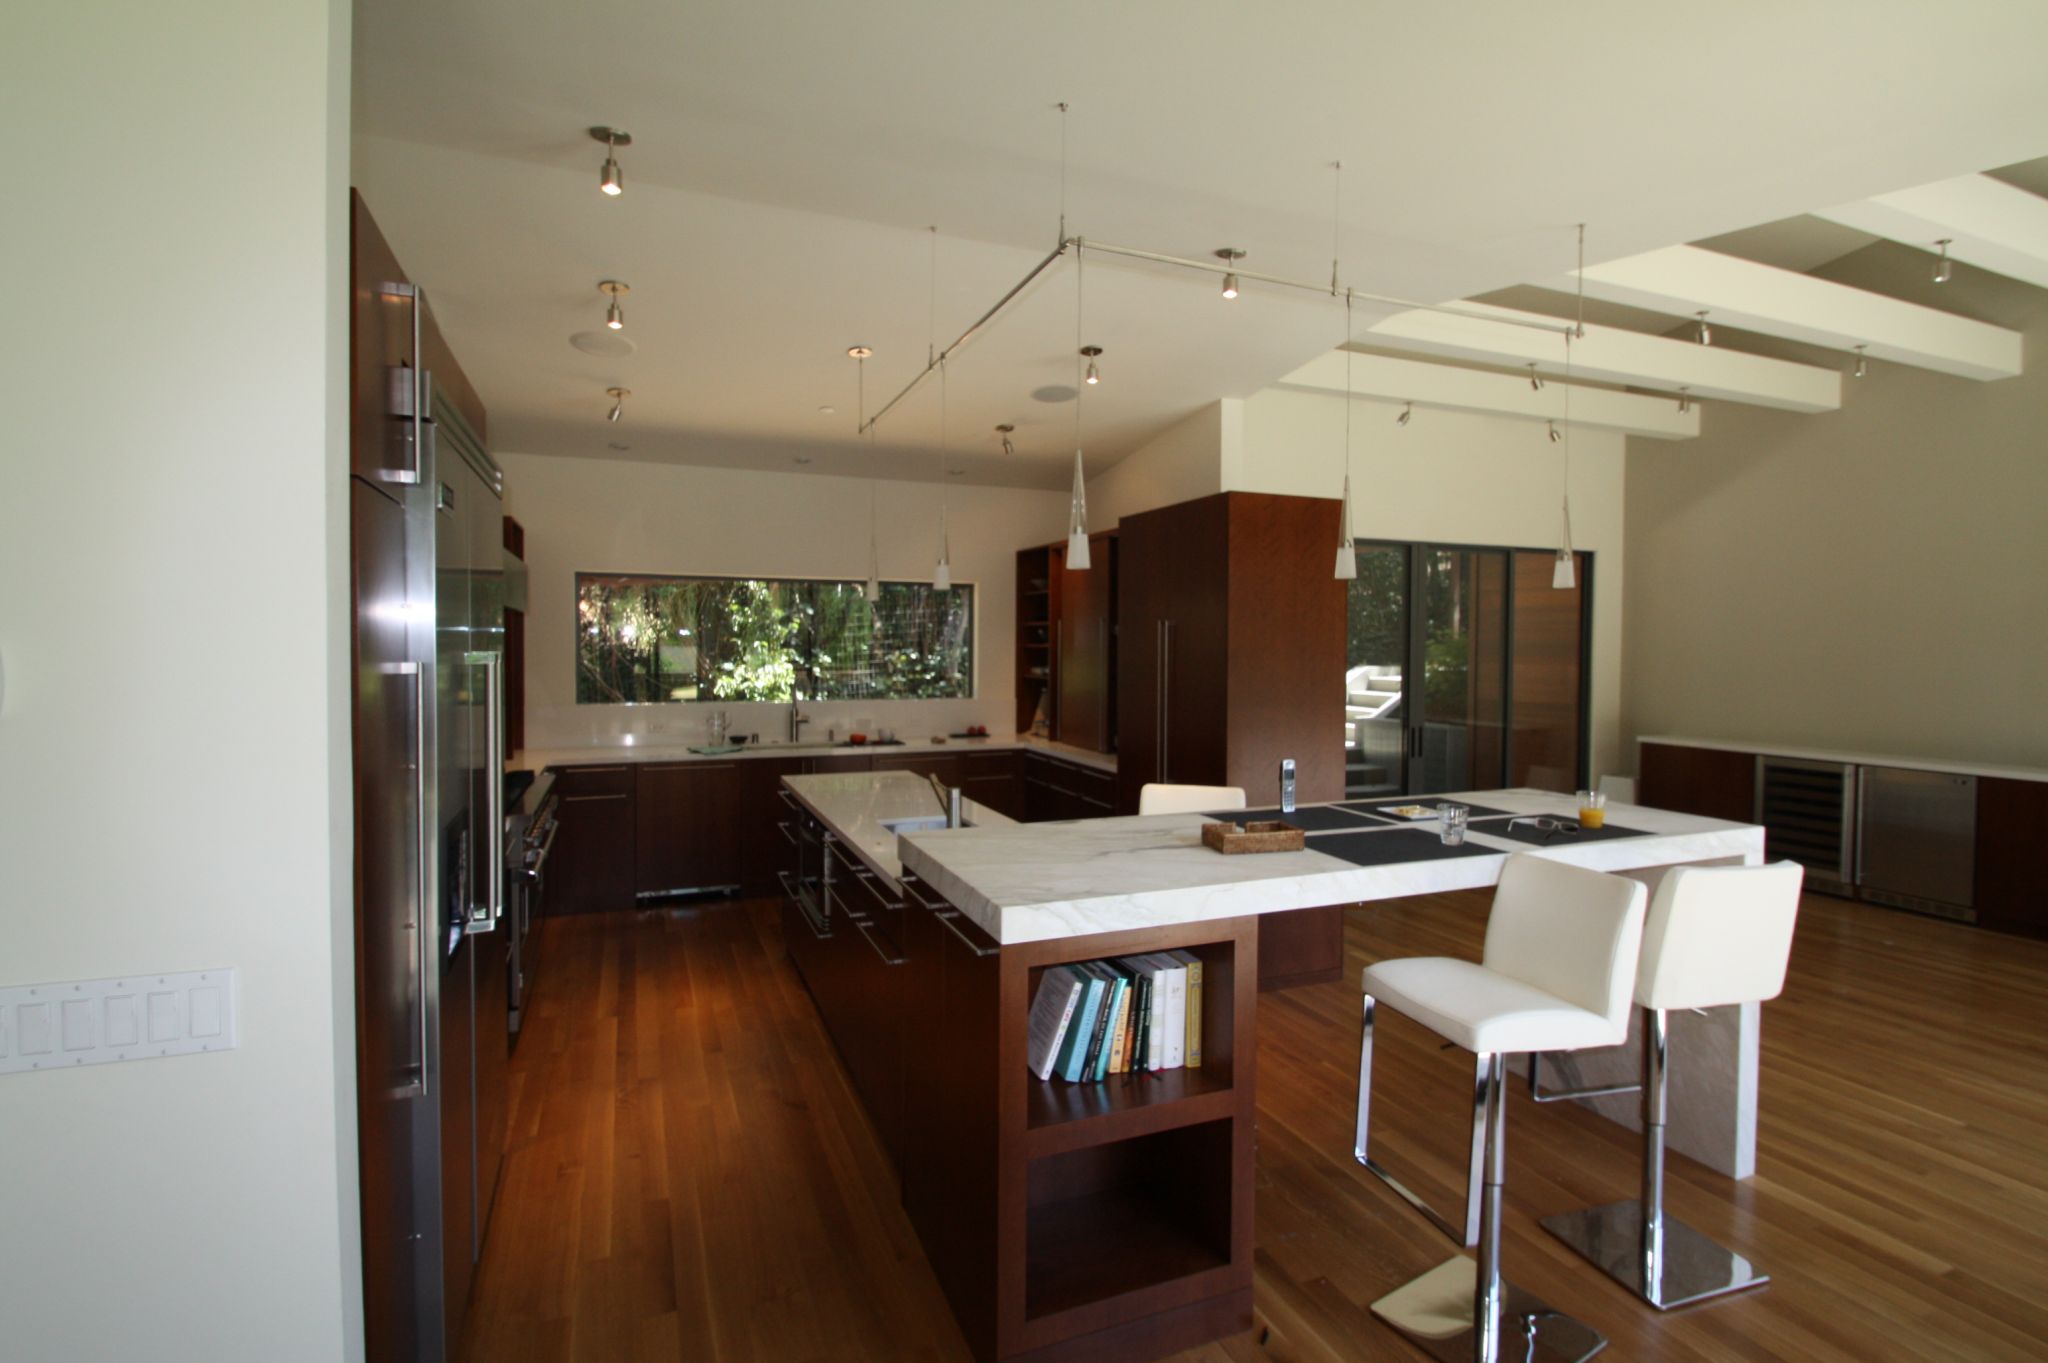 Ktichen and Dining Area of New Custom Home in Mill Valley CA